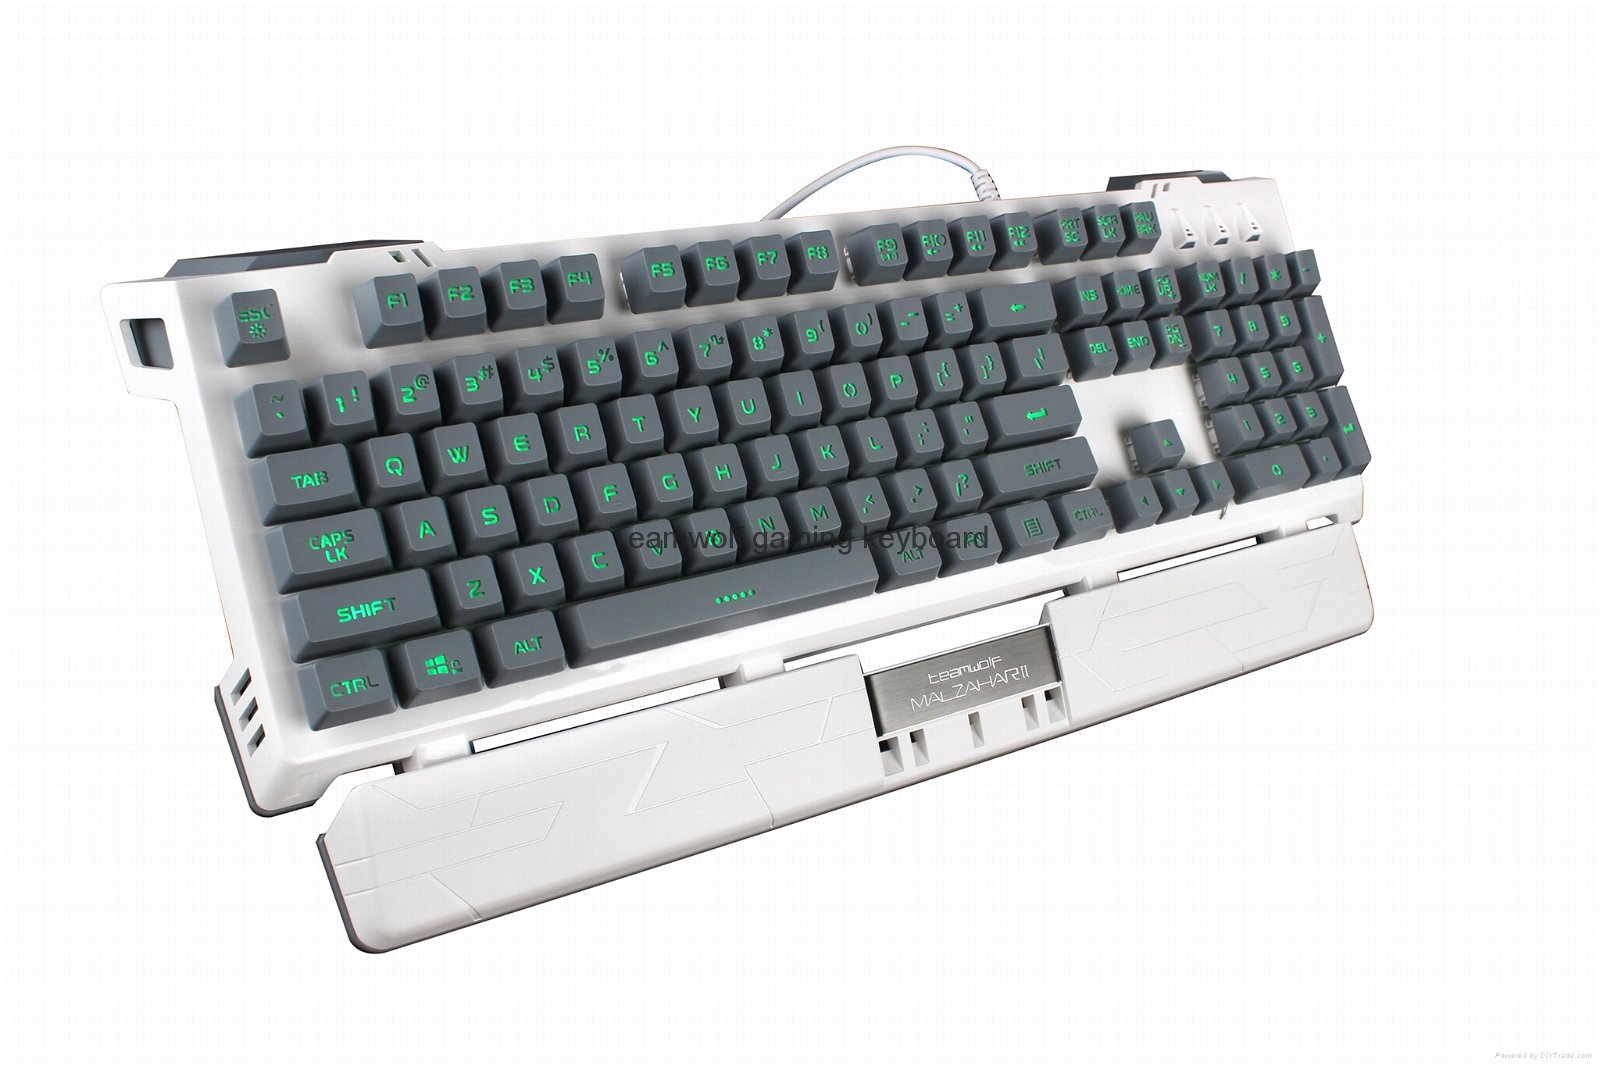 Arbiter-TEAMWOLF wired Membrain gaming keyboard with color Mixed light-AK616 5